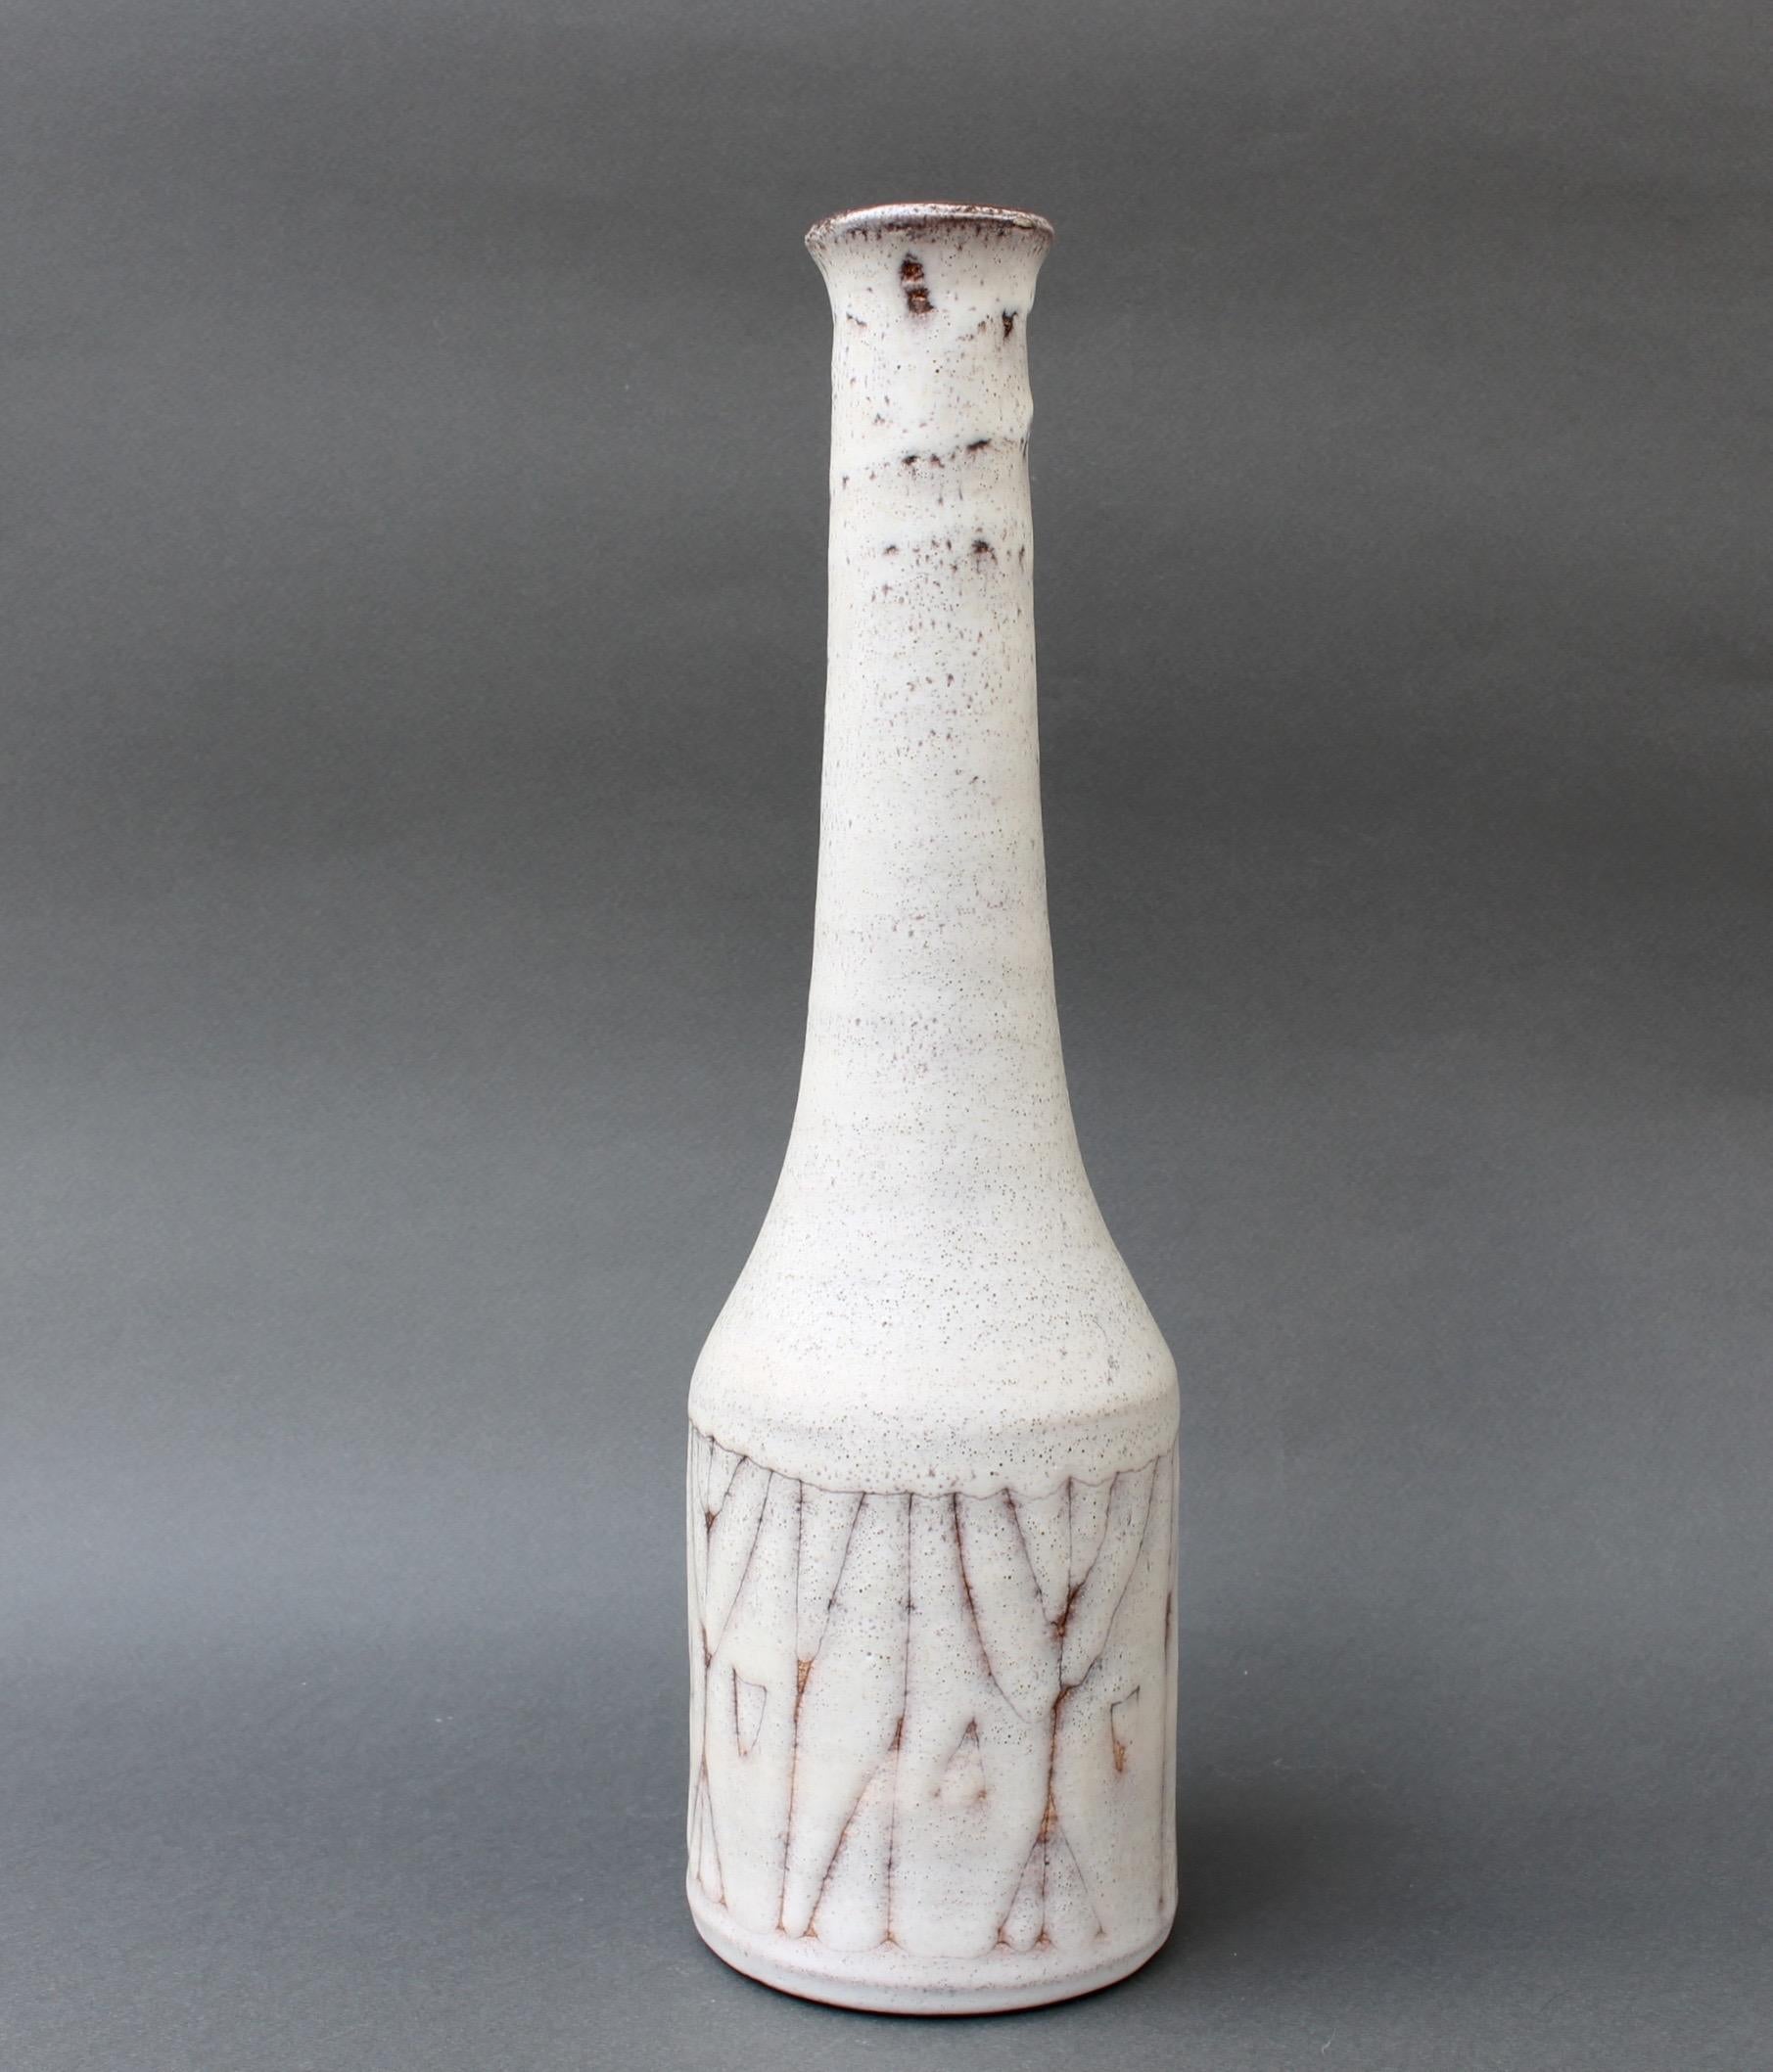 Midcentury ceramic flower vase (circa 1960s) by Jacques Pouchain, telier Dieulefit. This elongated sculptural flower vase is both beautiful and utilitarian. The neck is milk-white with variegated surface - brown speckles at the top reducing in size